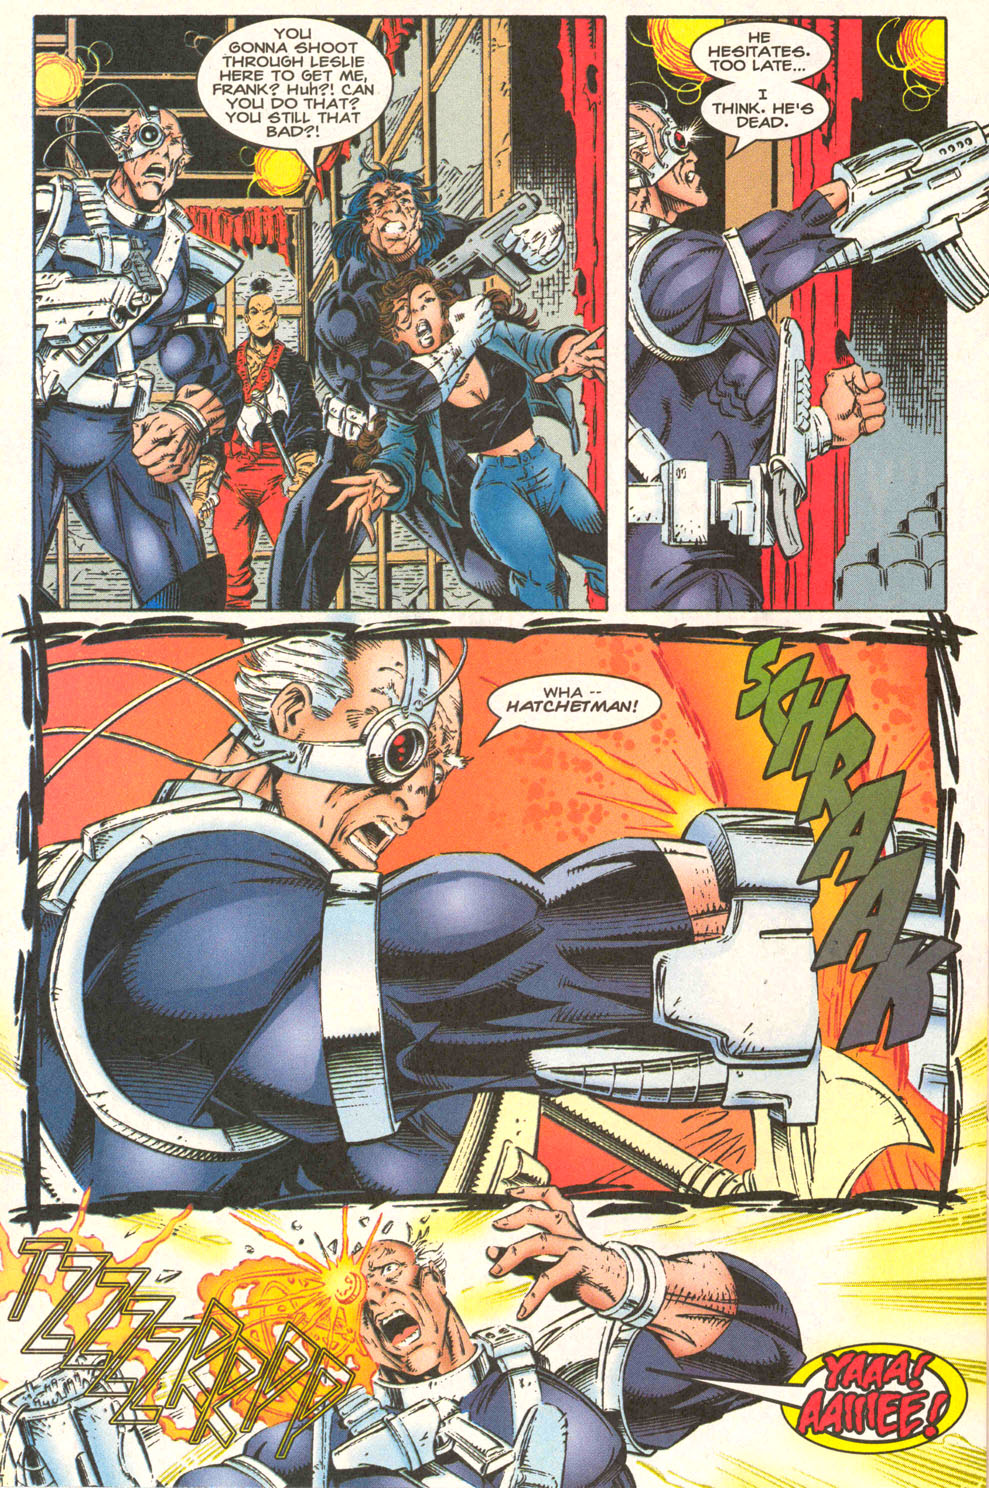 Punisher (1995) issue 10 - Last Shot Fired - Page 17